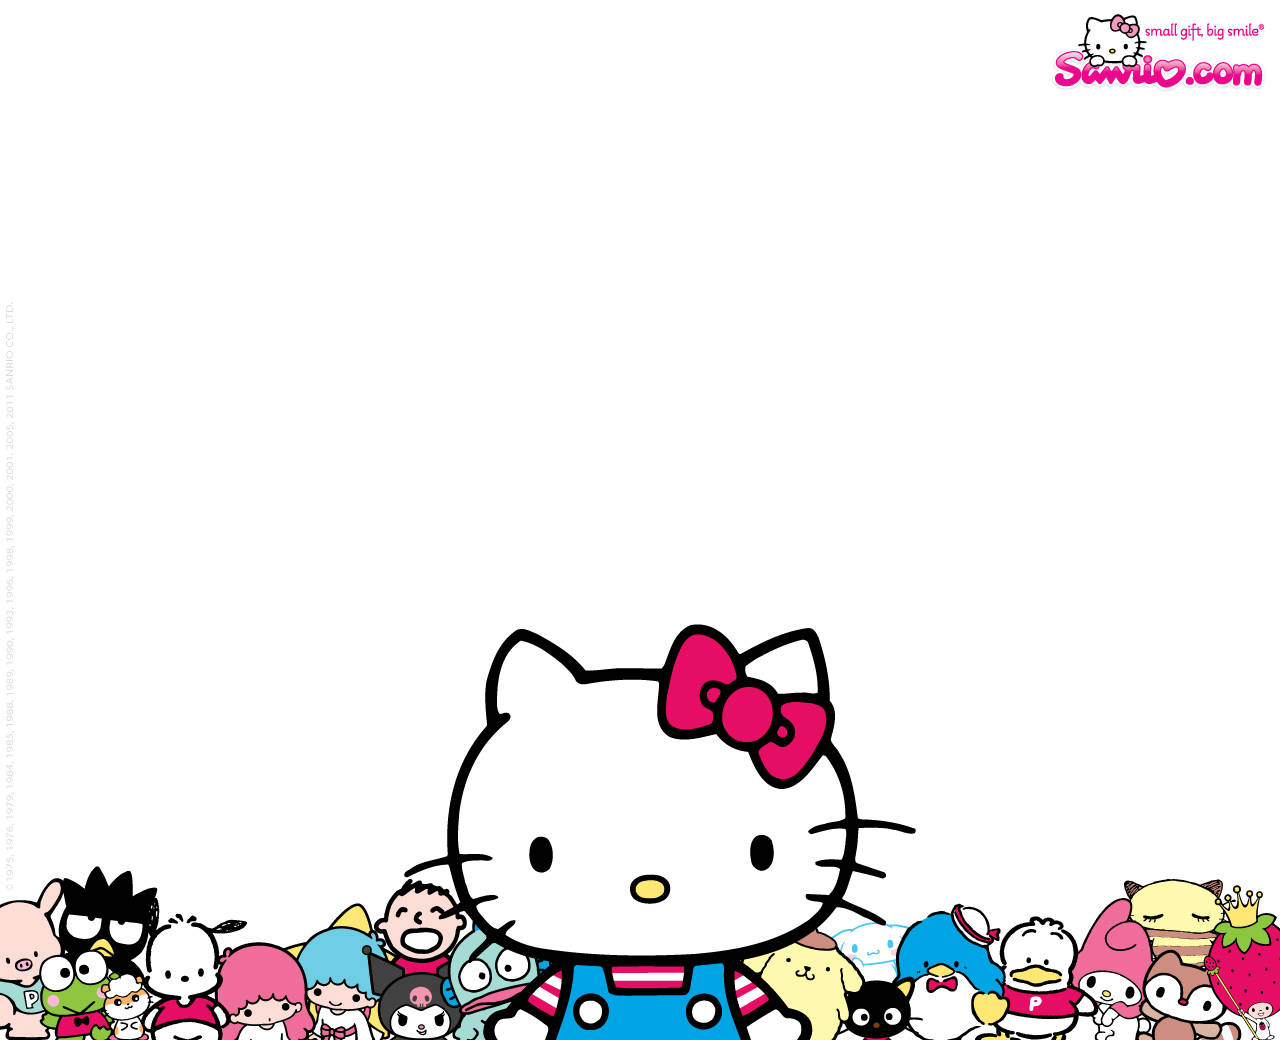 Sanrio Characters In White Background Wallpaper